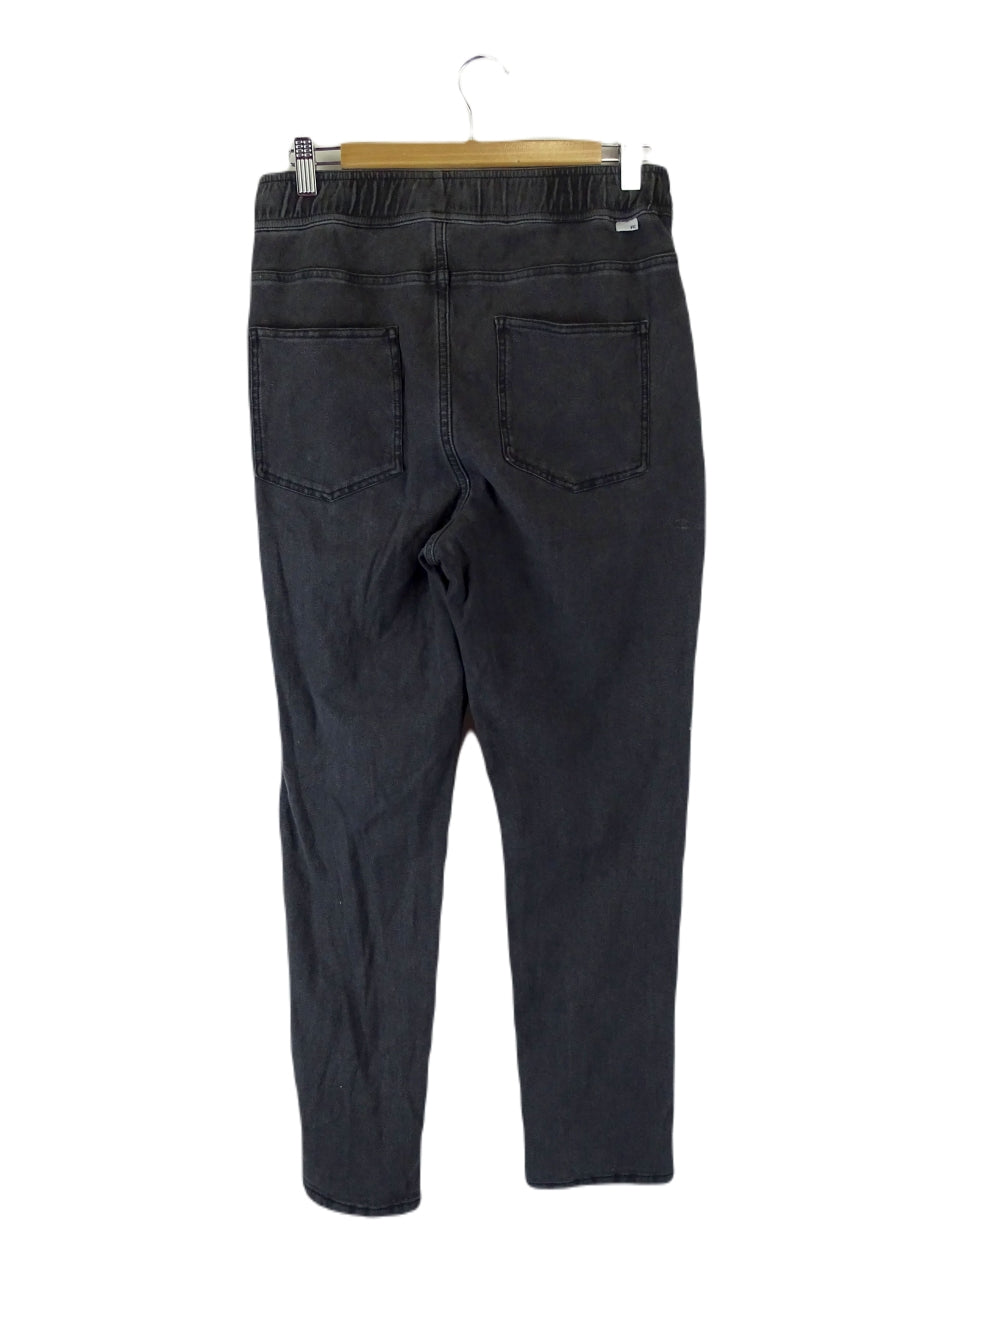 French Connection Charcoal Jeans 10